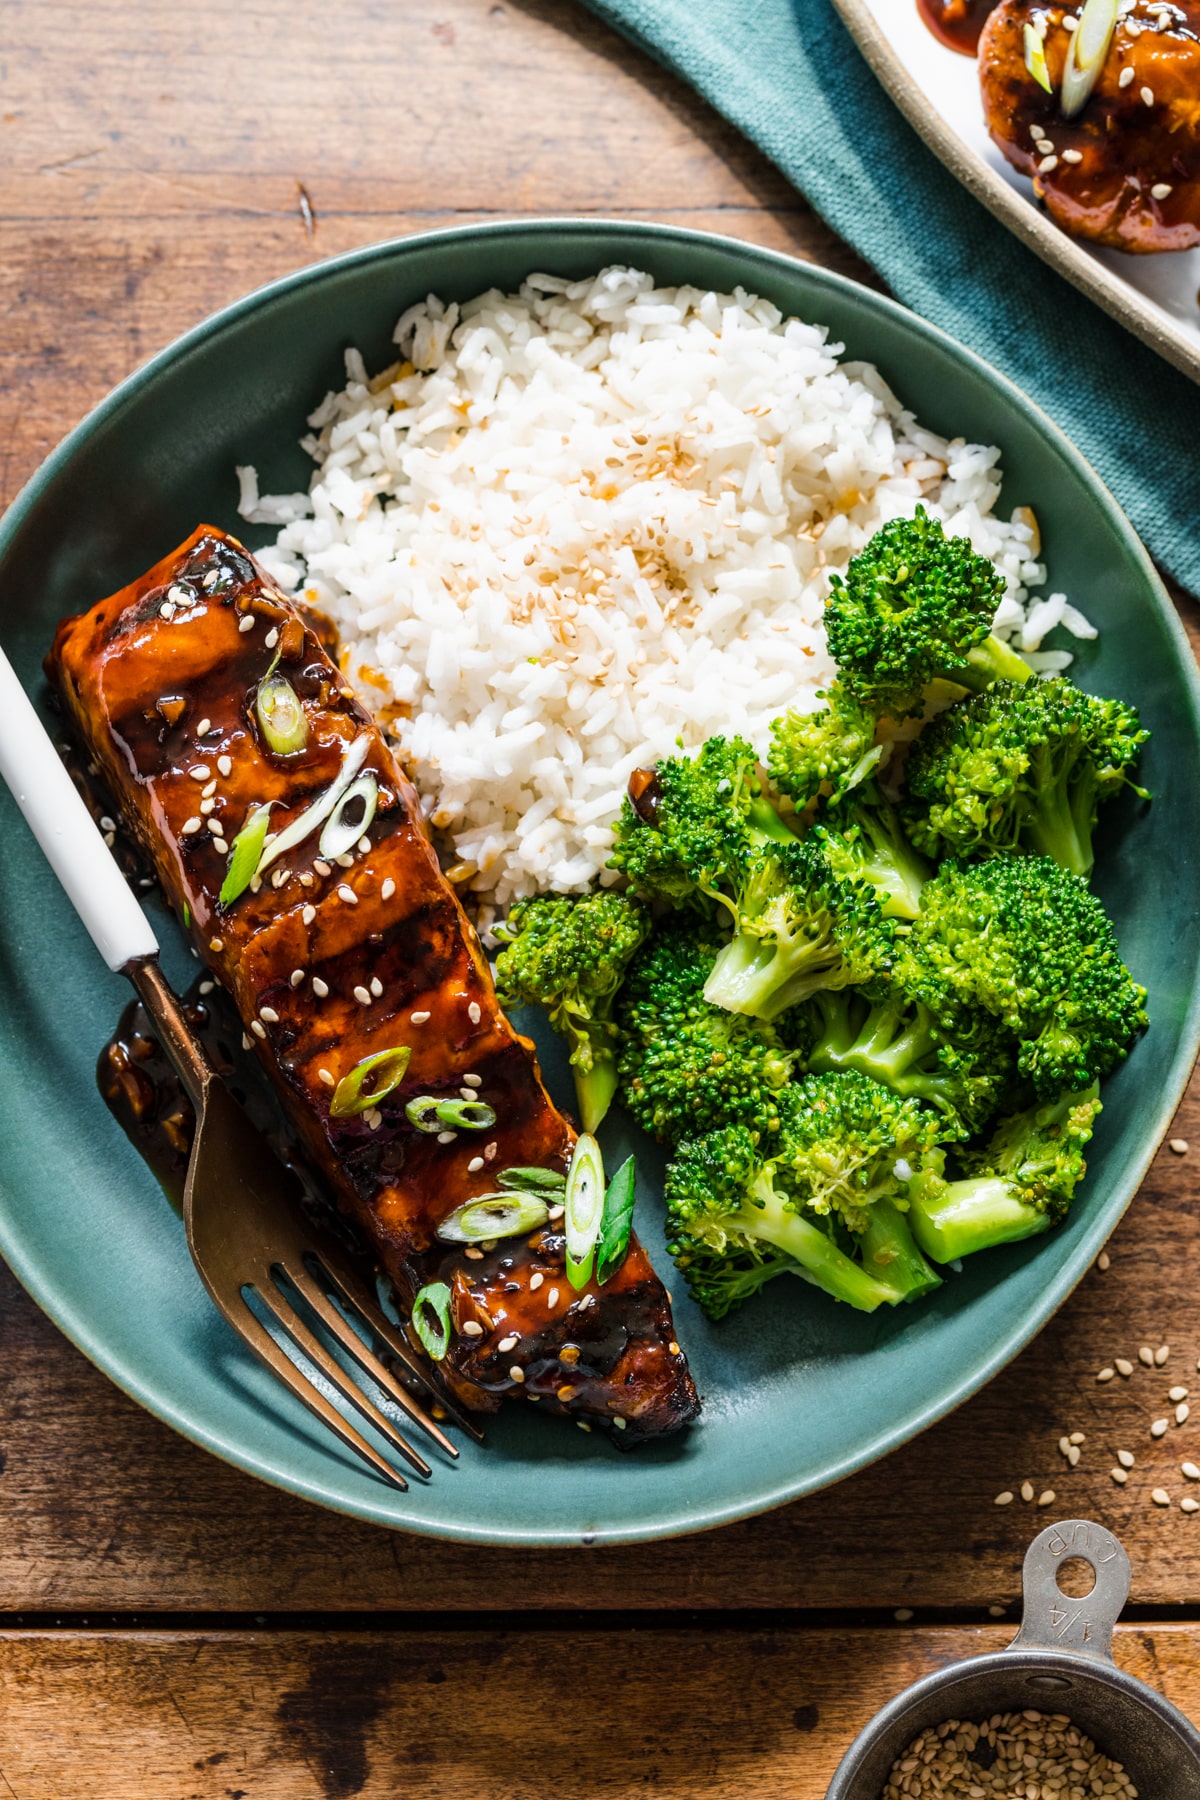 A blue plate with grilled teriyaki salmon next to rice and broccoli.